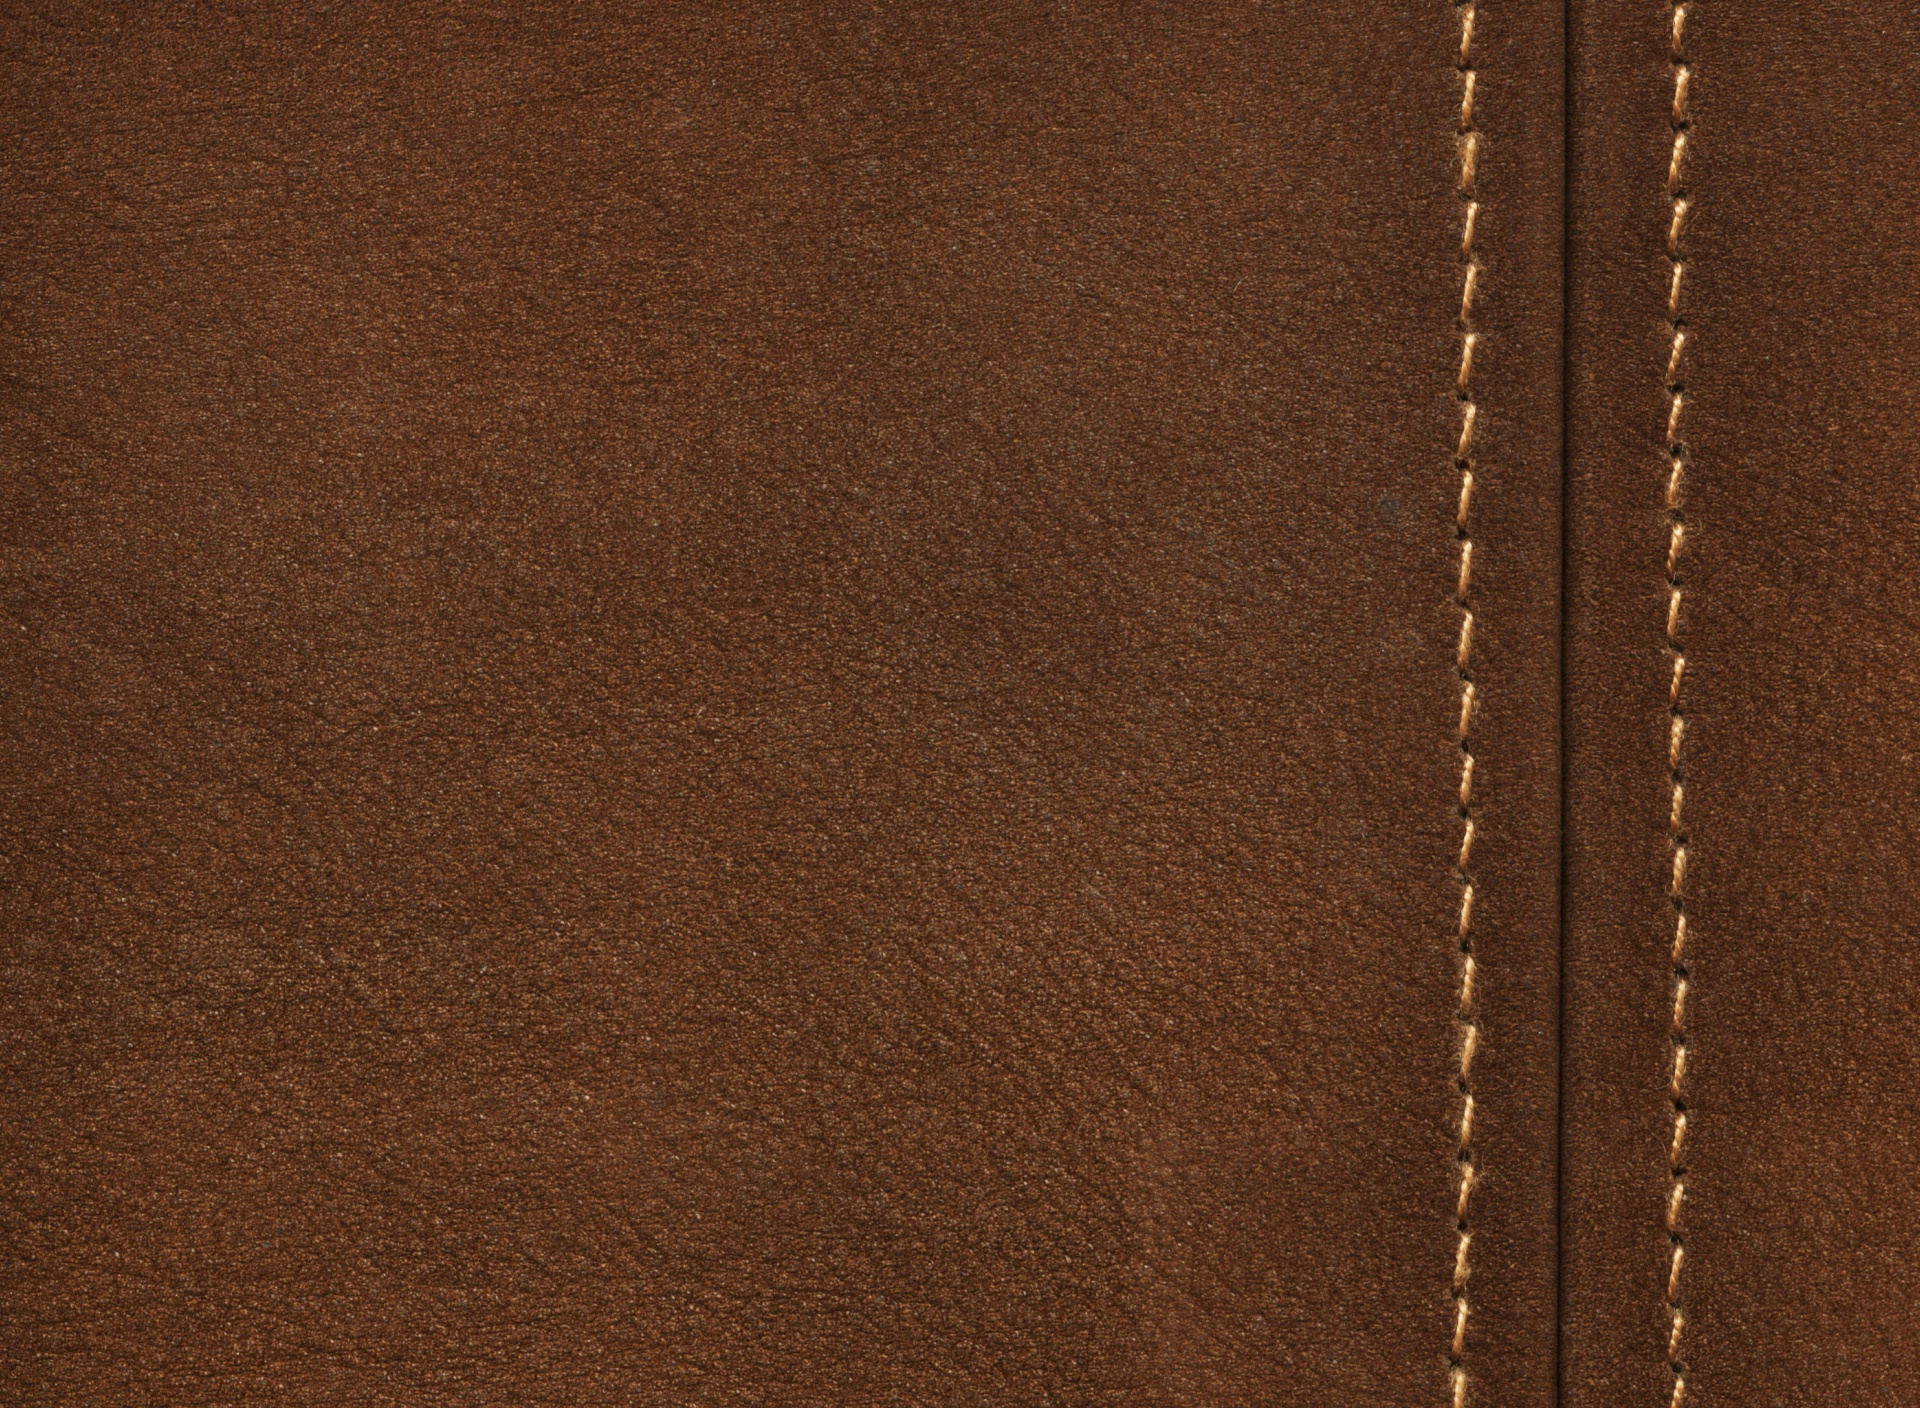 Das Brown Leather with Seam Wallpaper 1920x1408